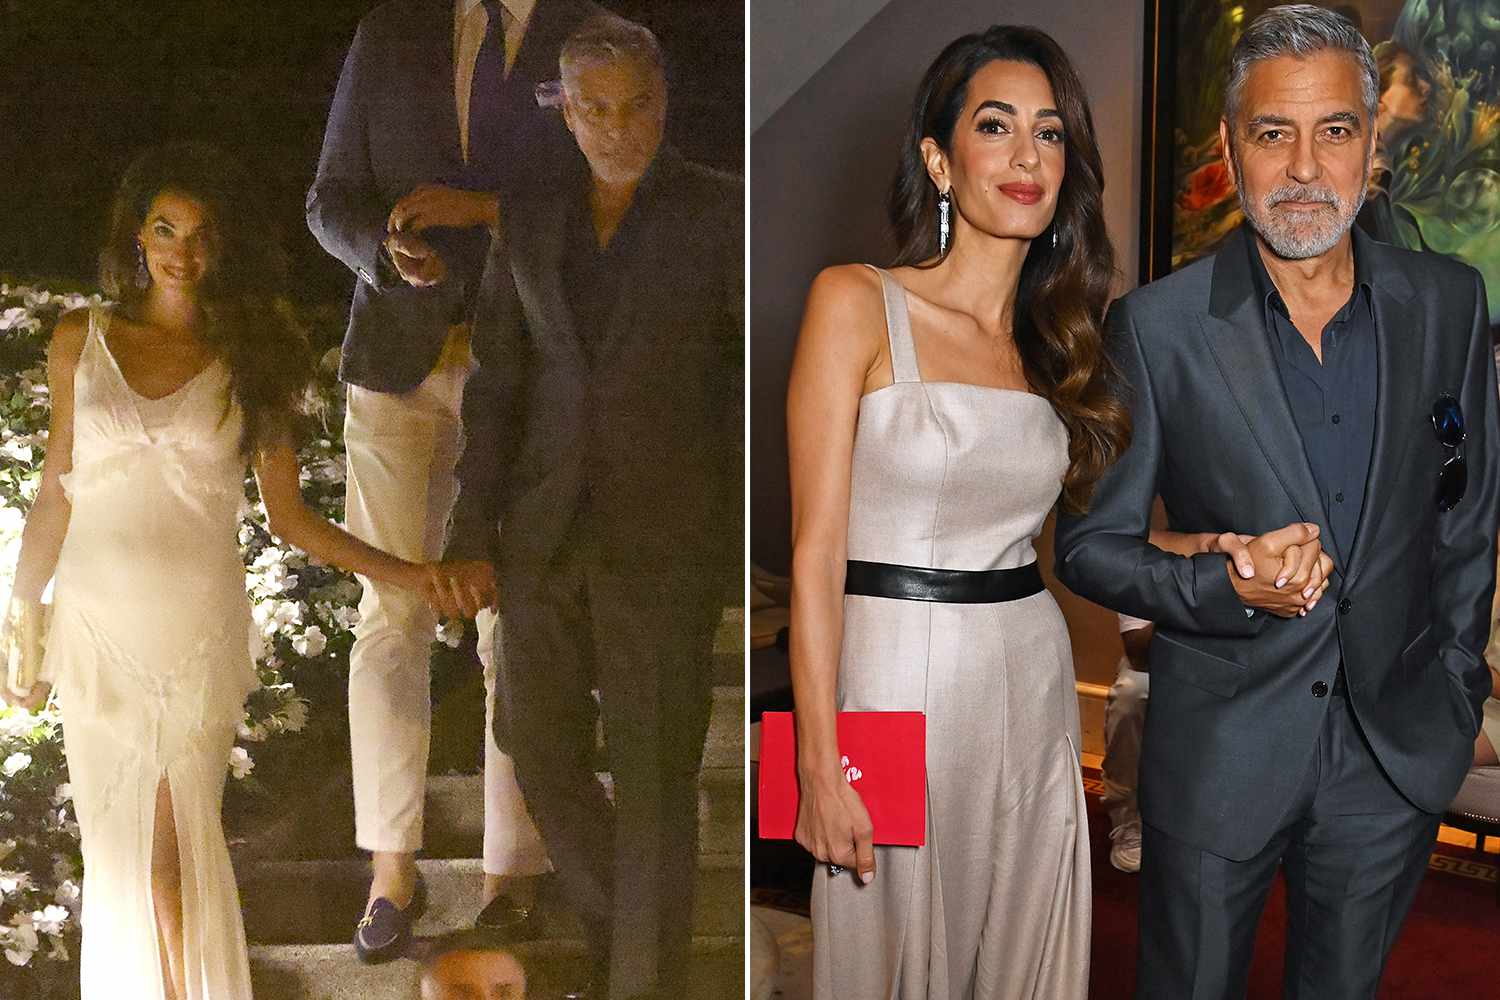 George and Amal Clooney: Hollywood's Best-Dressed Duo - See Their Stylish Looks! 16